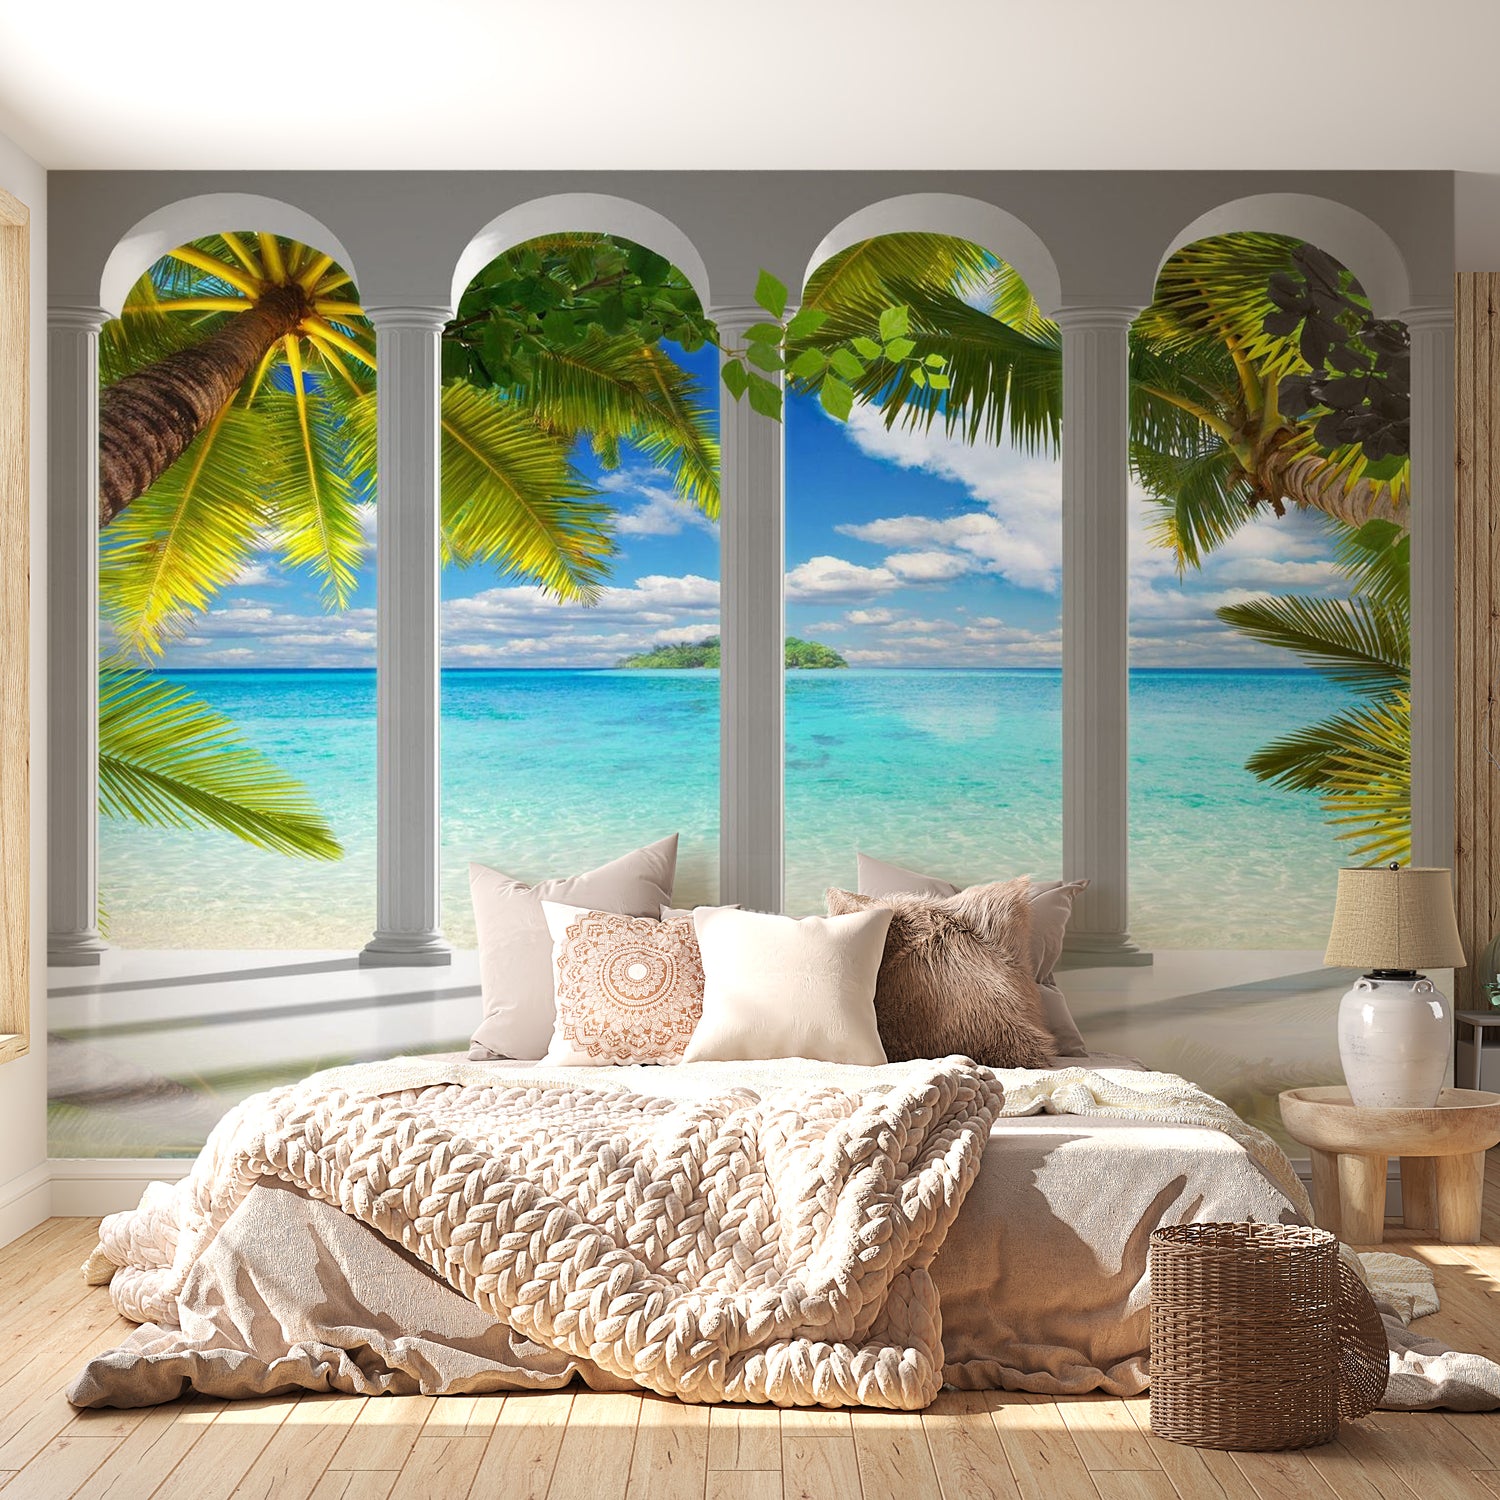 Peel & Stick Tropical Wall Mural - Sea Behind Columns - Removable Wall Decals